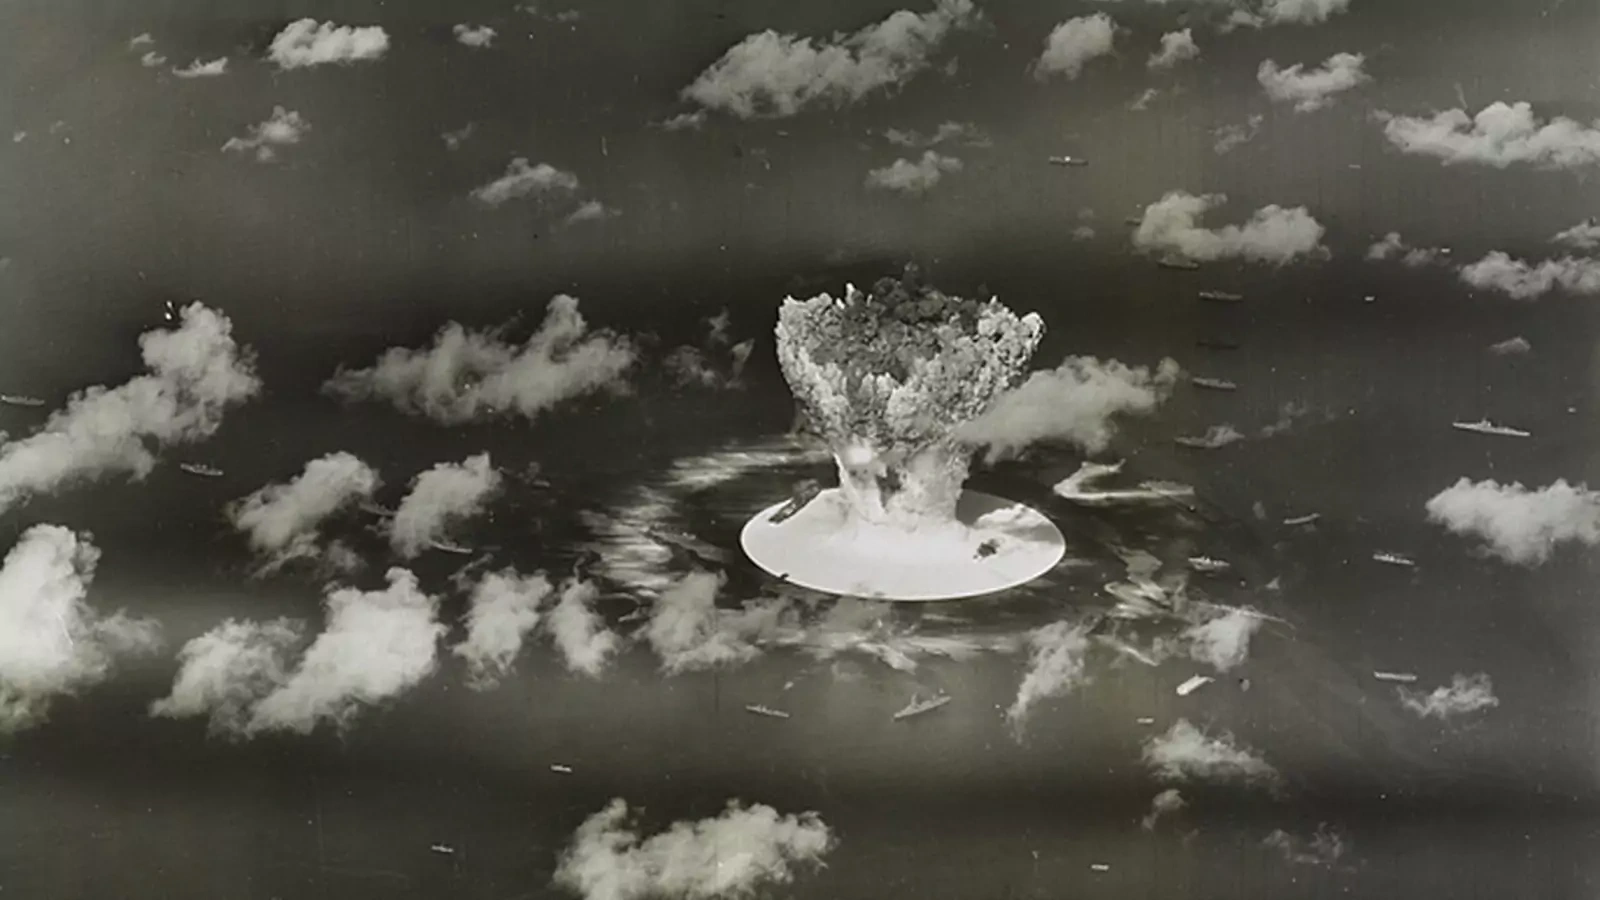 A mushroom cloud rises with ships below during the Operation Crossroads nuclear weapons test on Bikini Atoll, Marshall Islands.